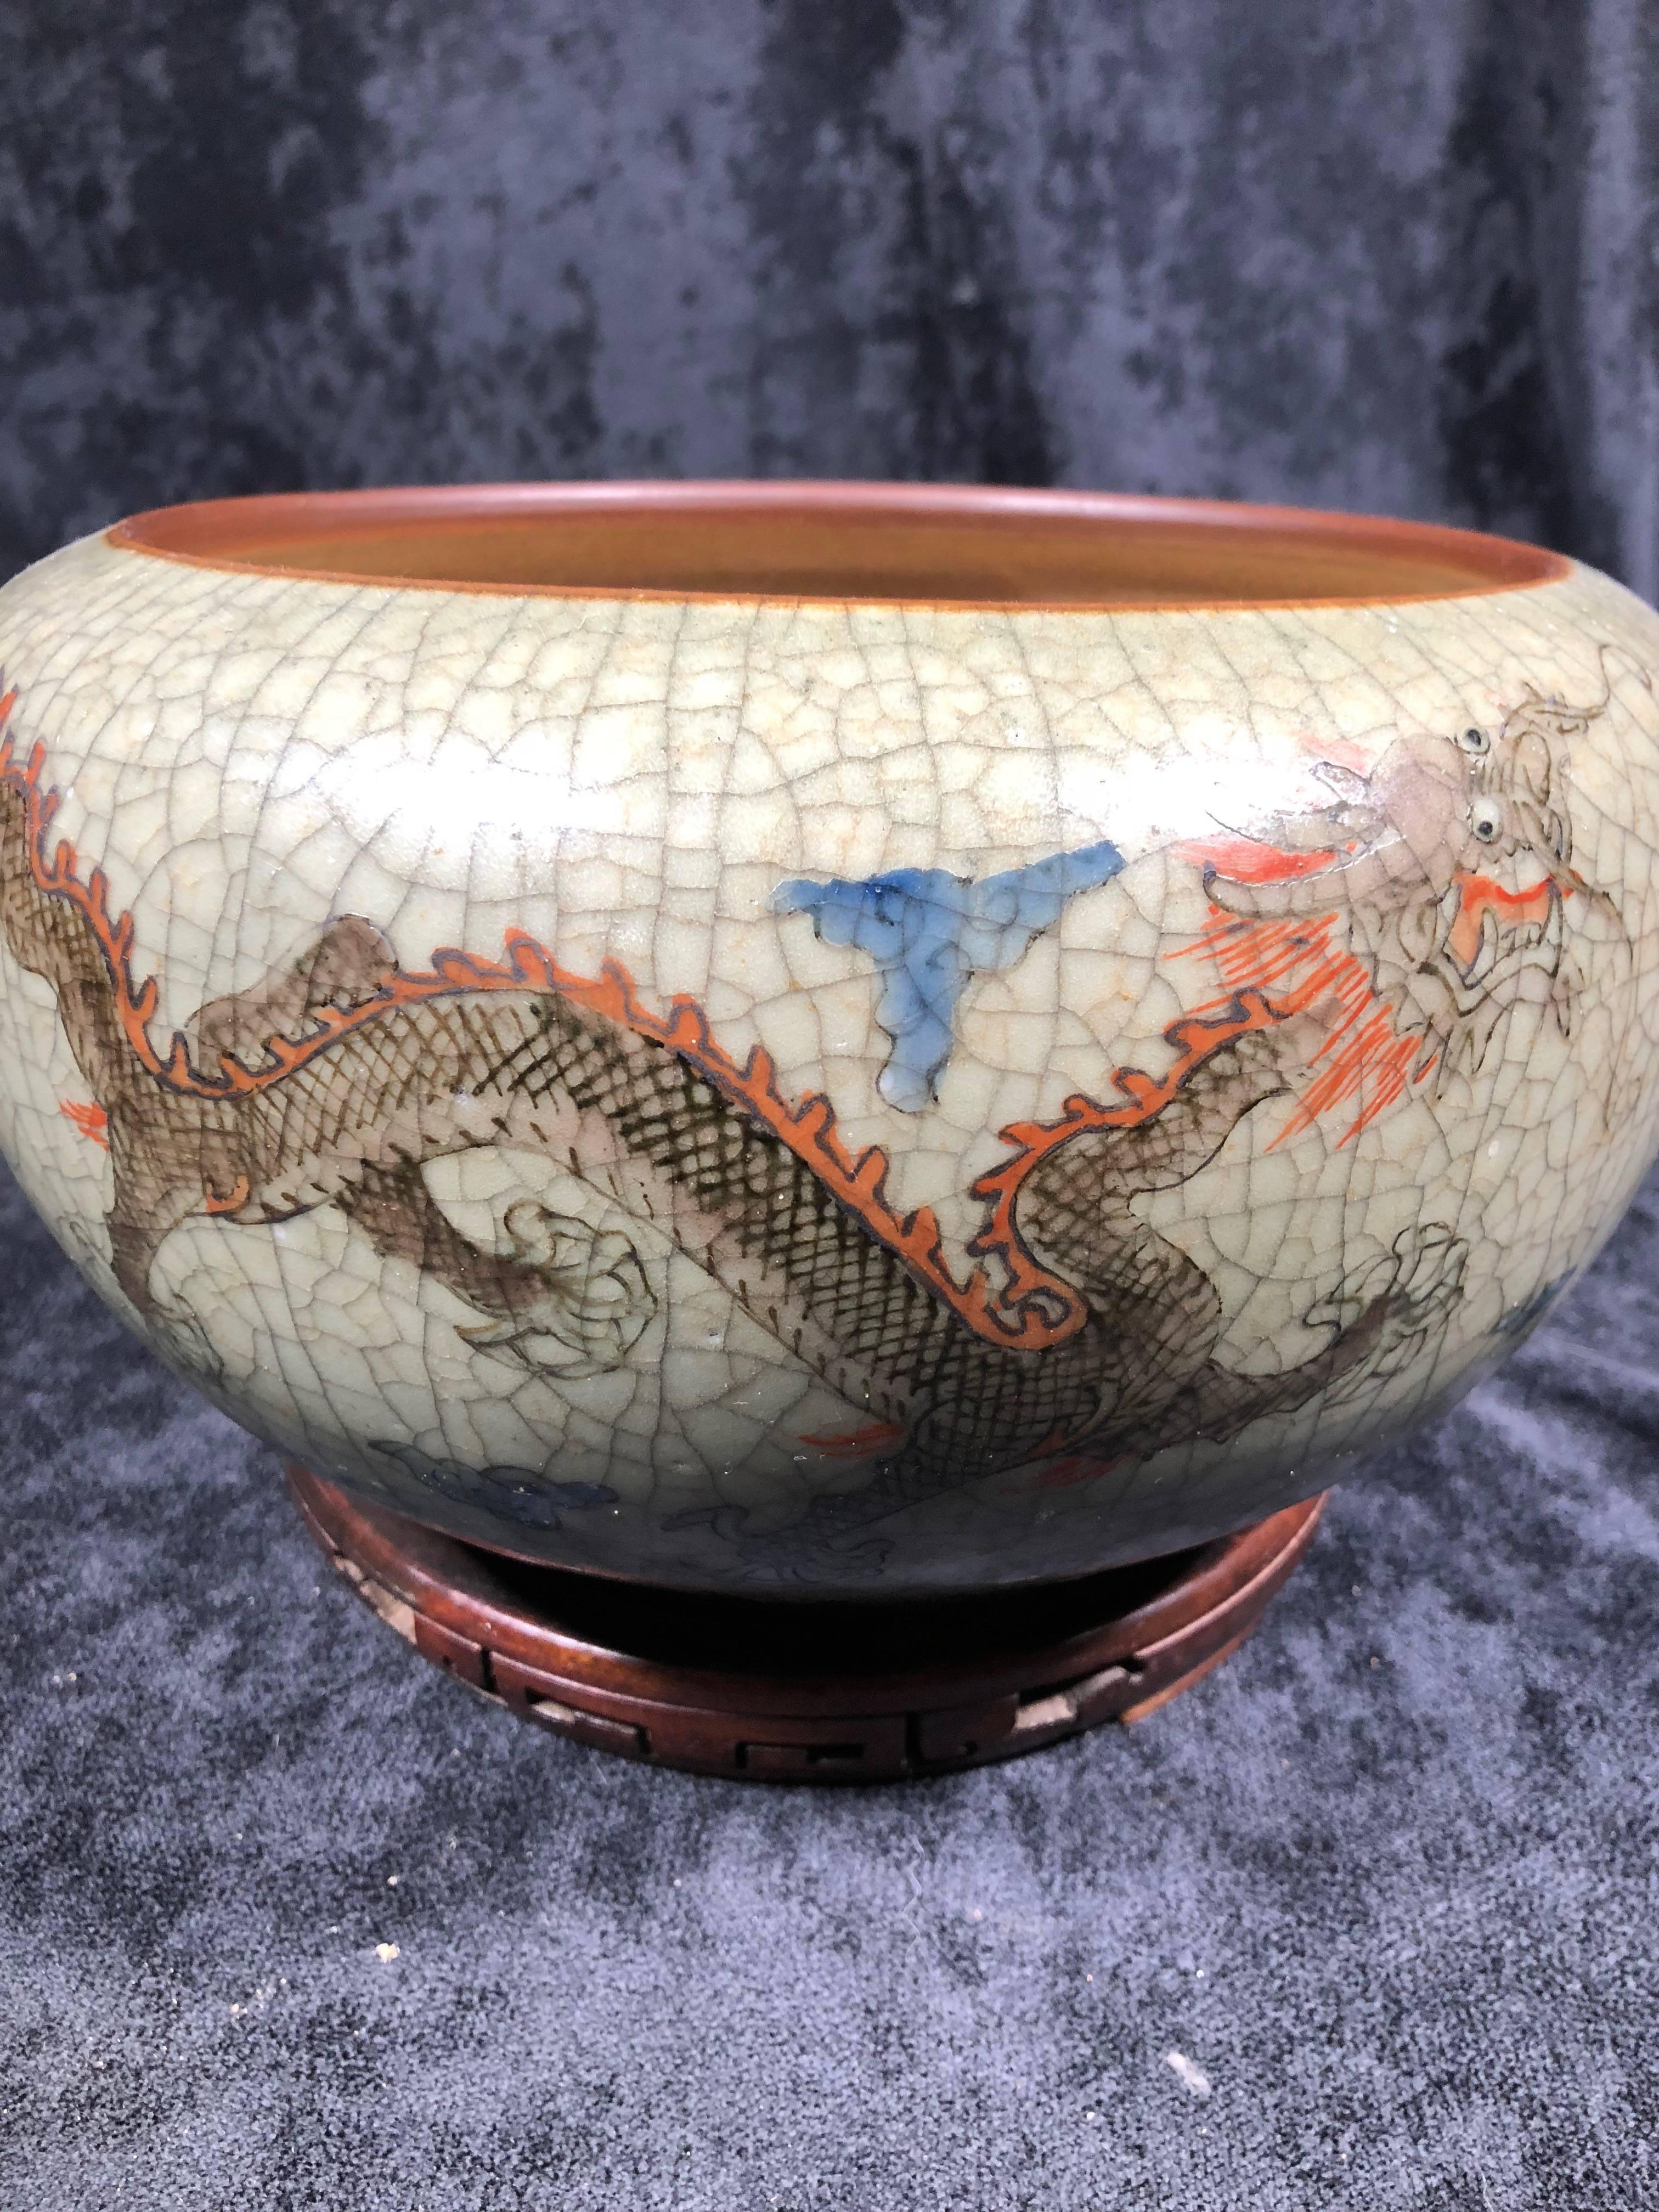 Very elegant Chinese early 20th century bowl from the Qing era. Possibly Northern Chinese in origin. Very unusual motifs of Buddhism paired with five toed dragon, Buddha's hand and various elements. Crackle celadon glaze and in excellent condition.